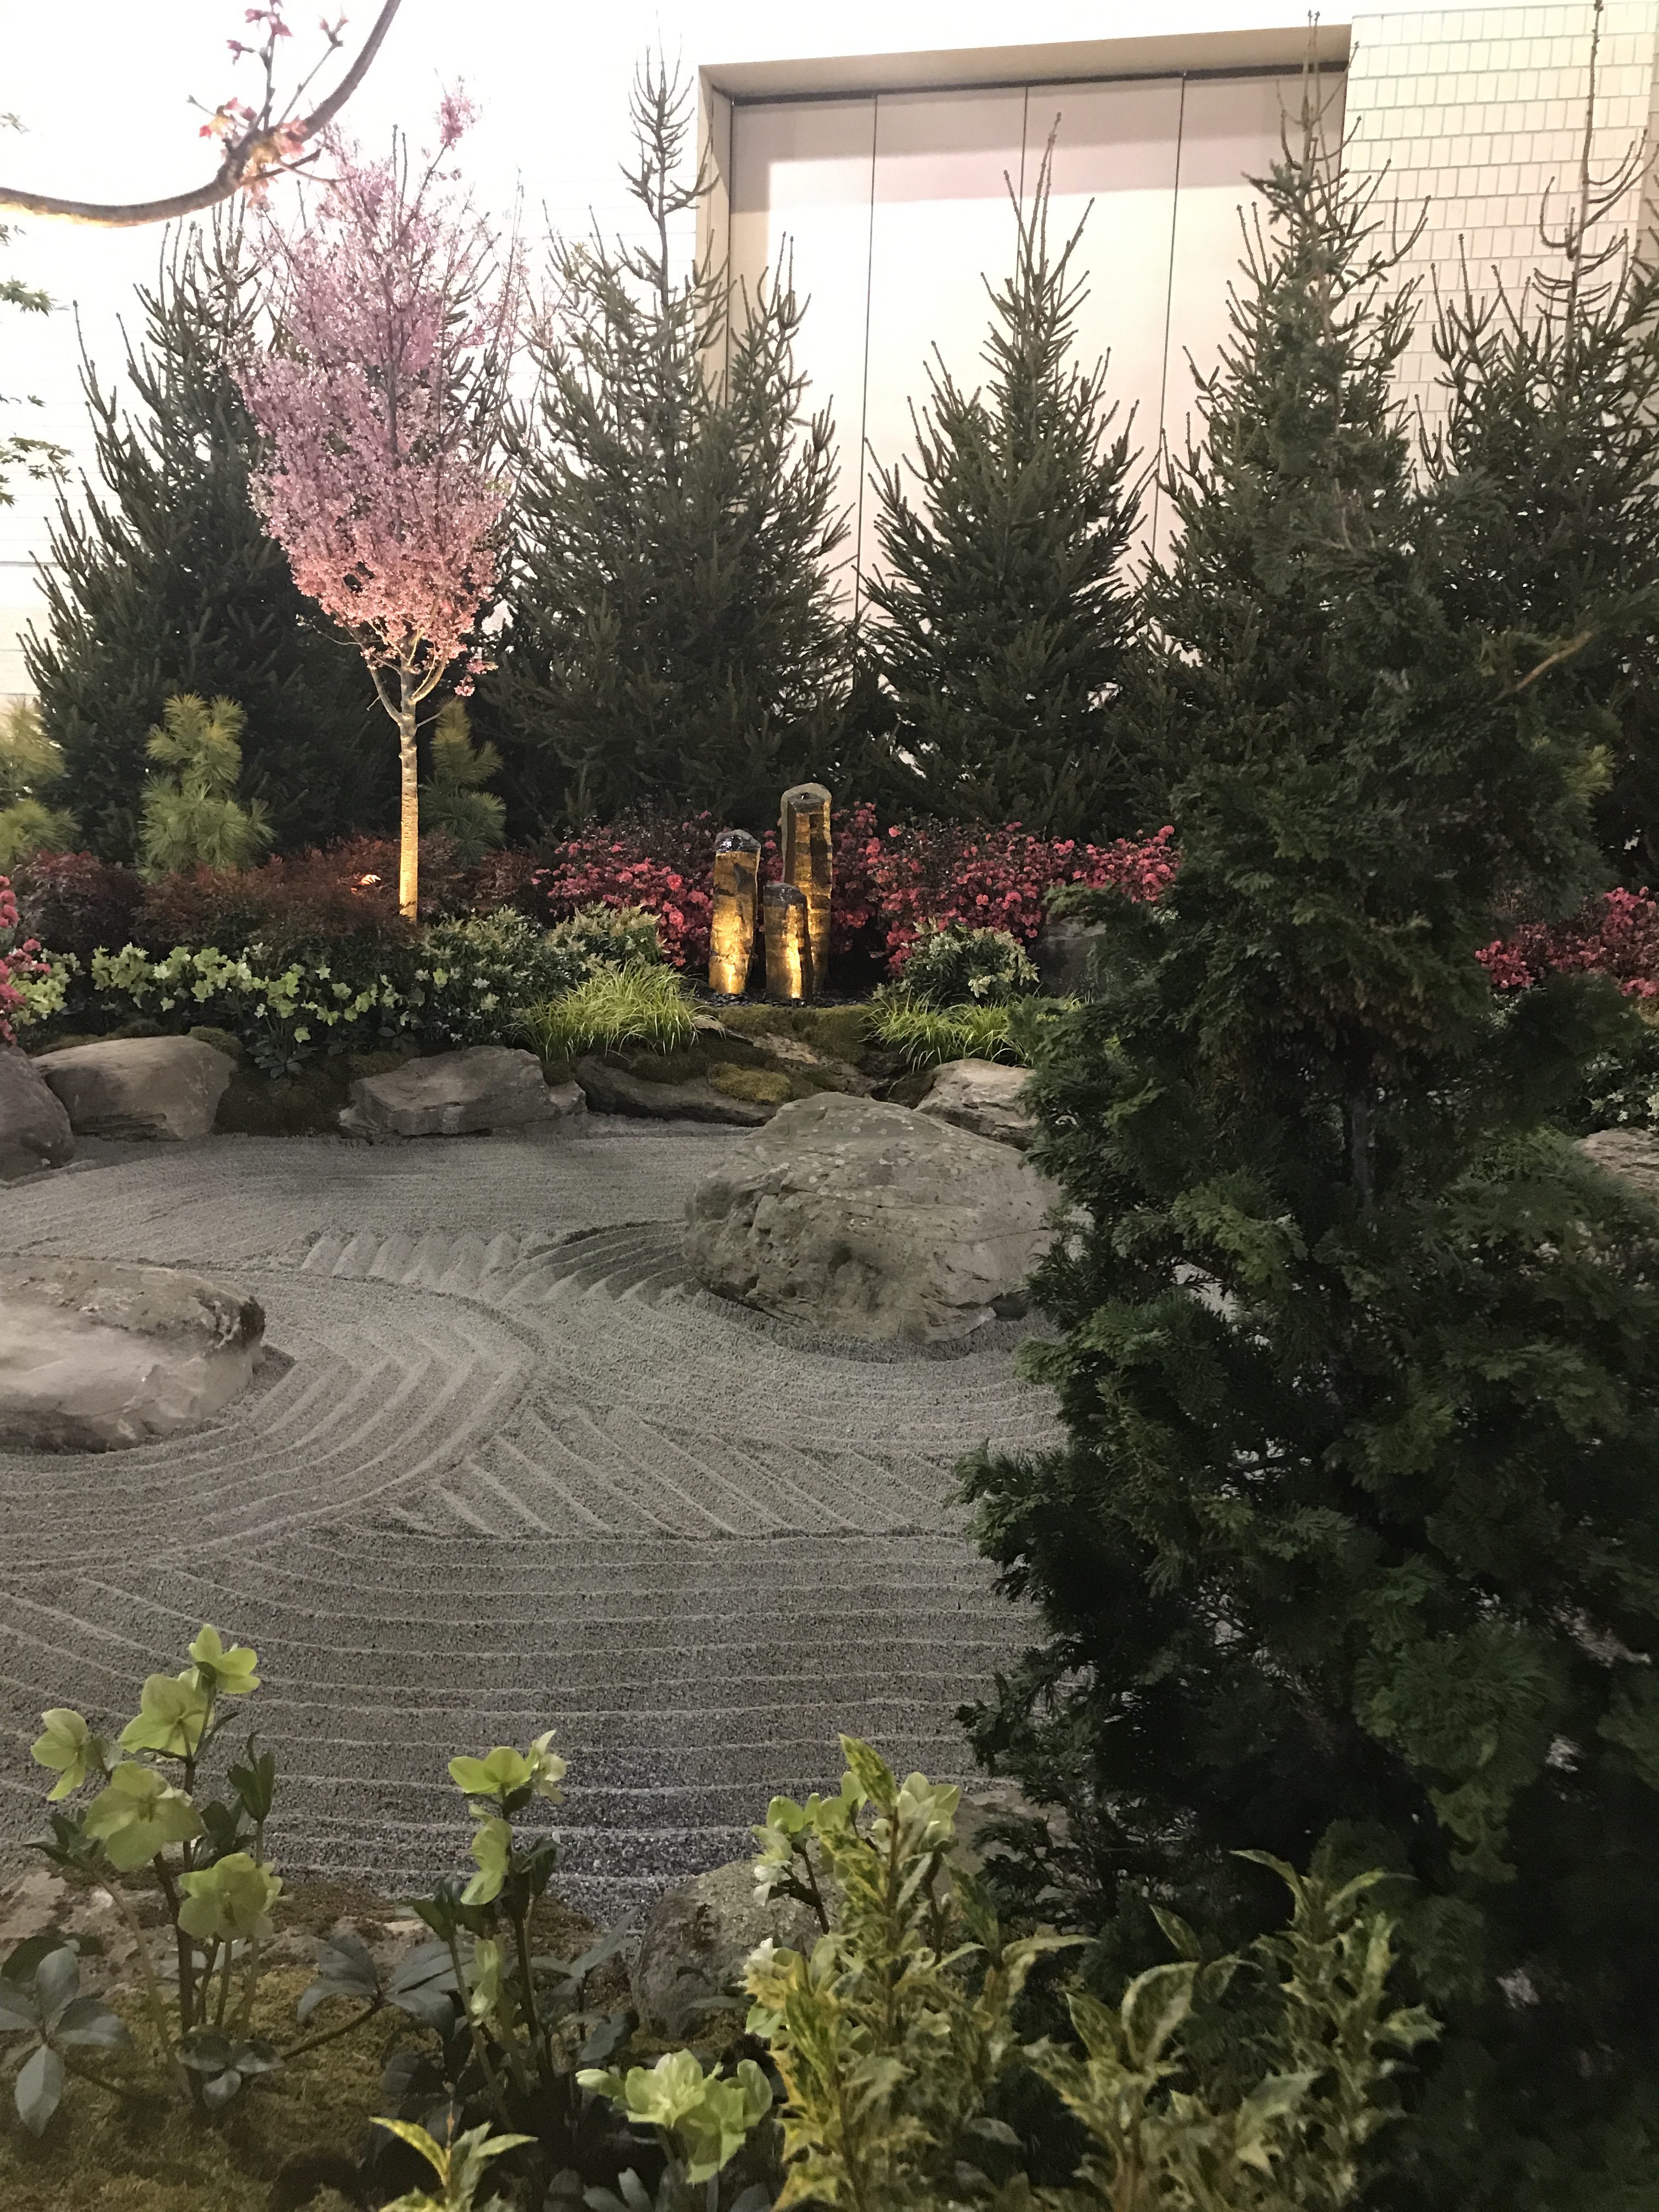 2018 Philly Flower Show; Japanese Sakuteiki garden with sand mimicking waves of water